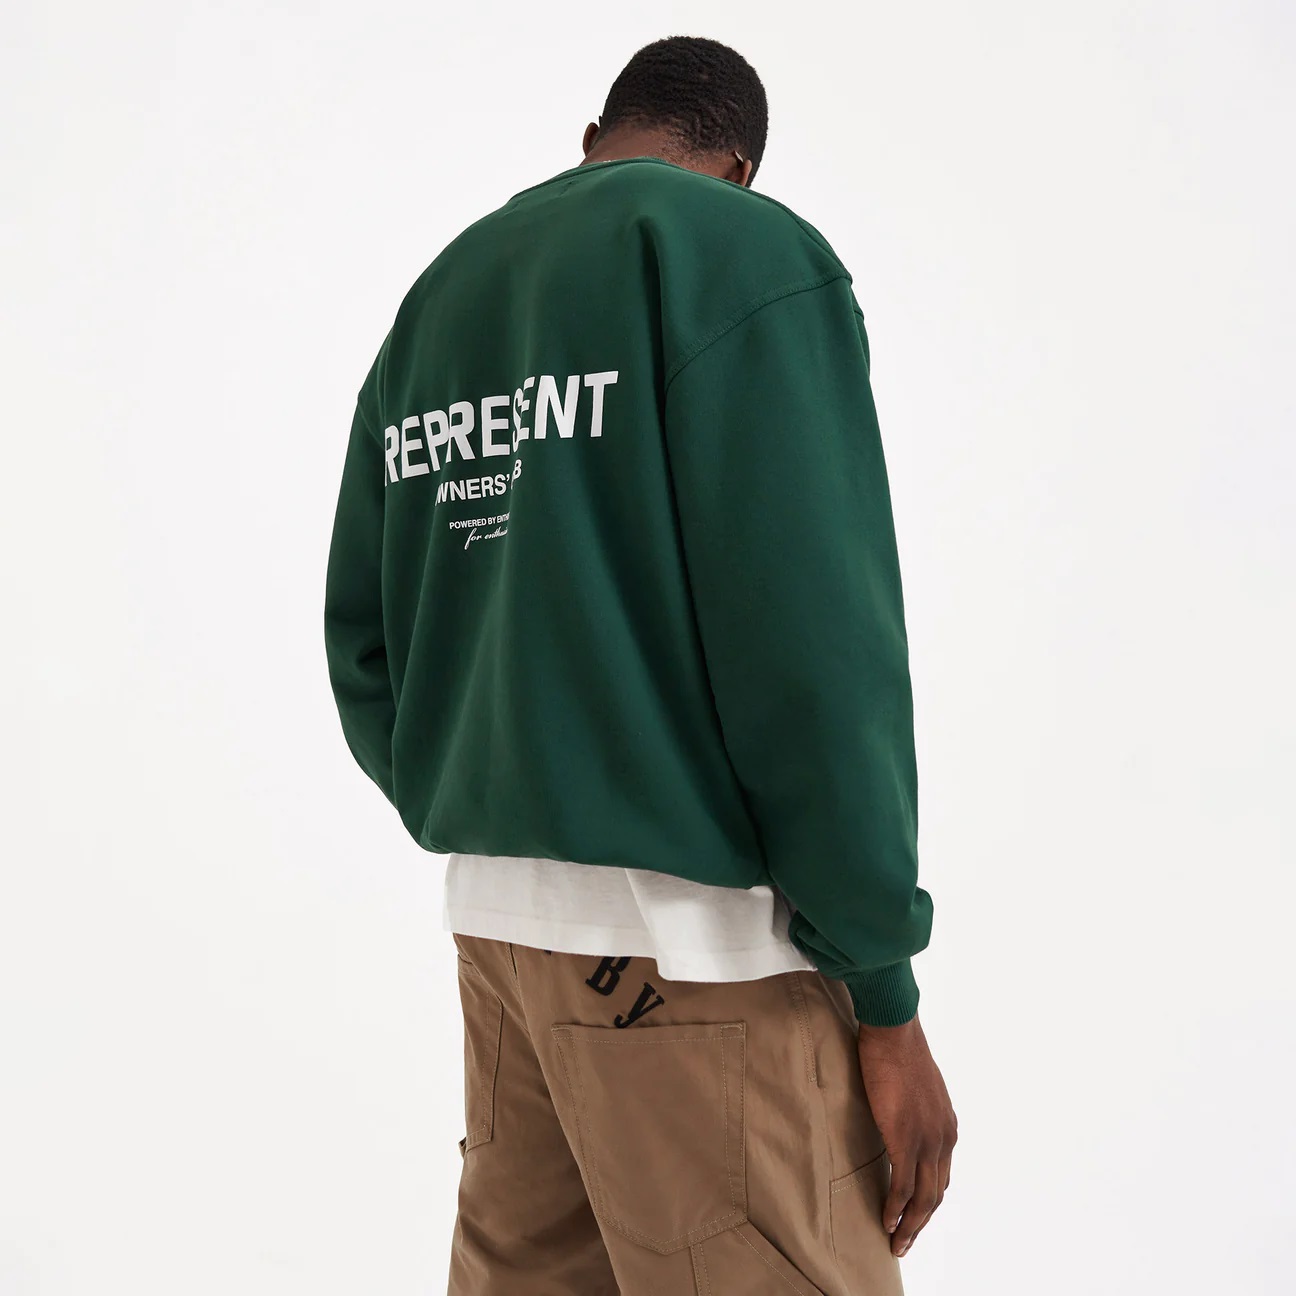 REPRESENT Owners Club Sweater in Racing Green XL